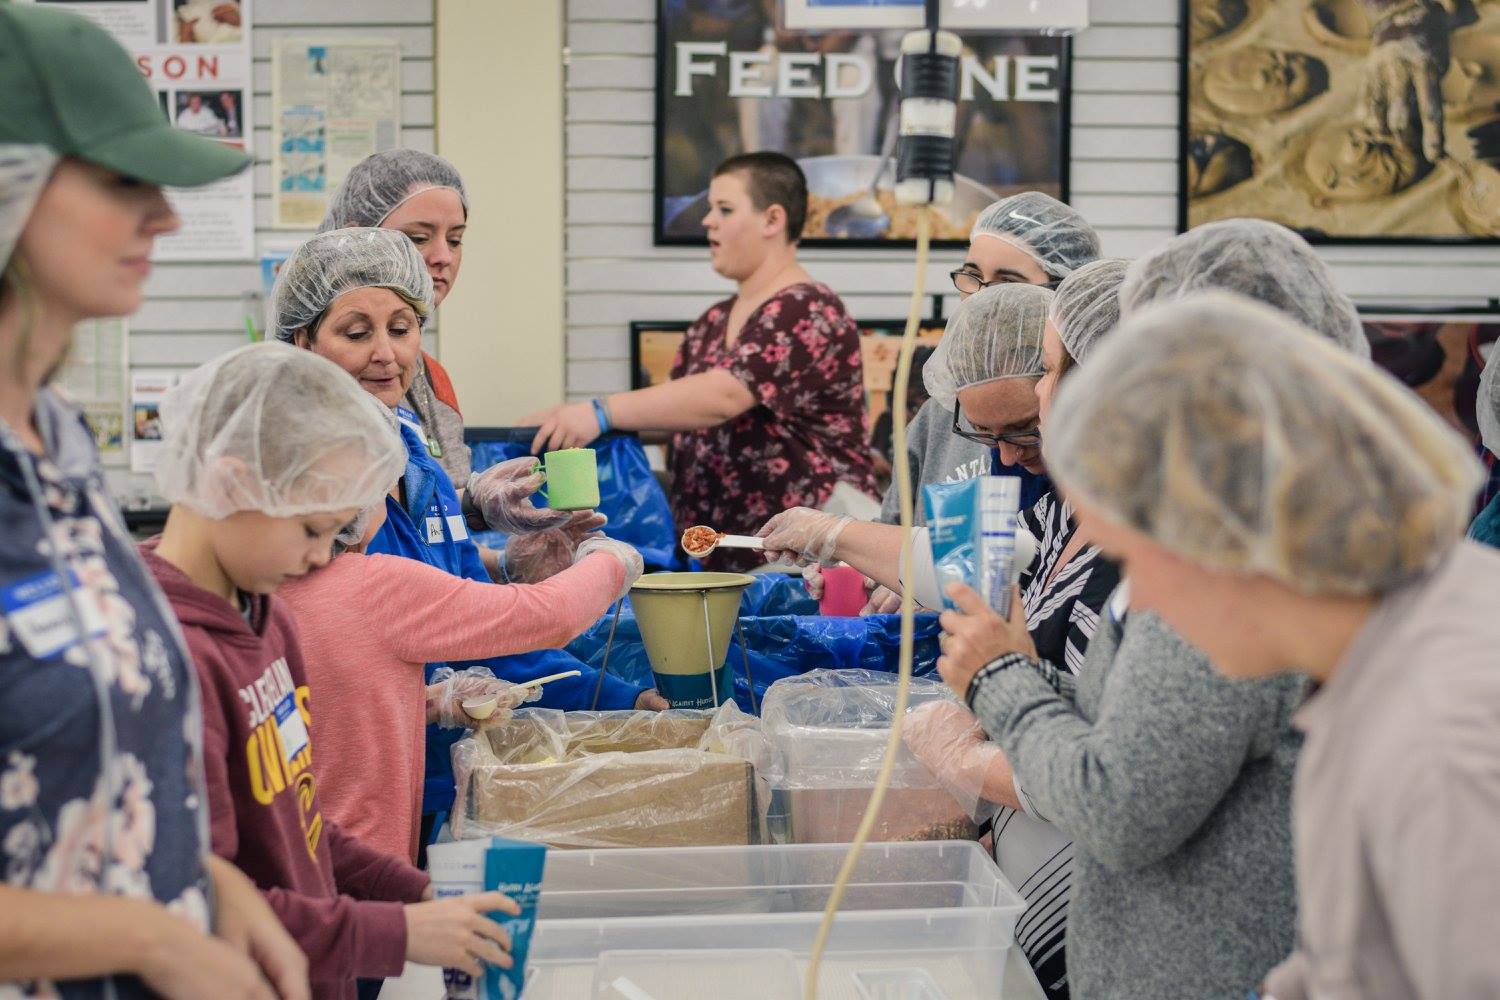 More than 350 Whitewater Crossing church members mobilized, on short notice, to pack more than 8 tons of food and supplies that were sent to Haiti. (Whitewater Crossing photo)